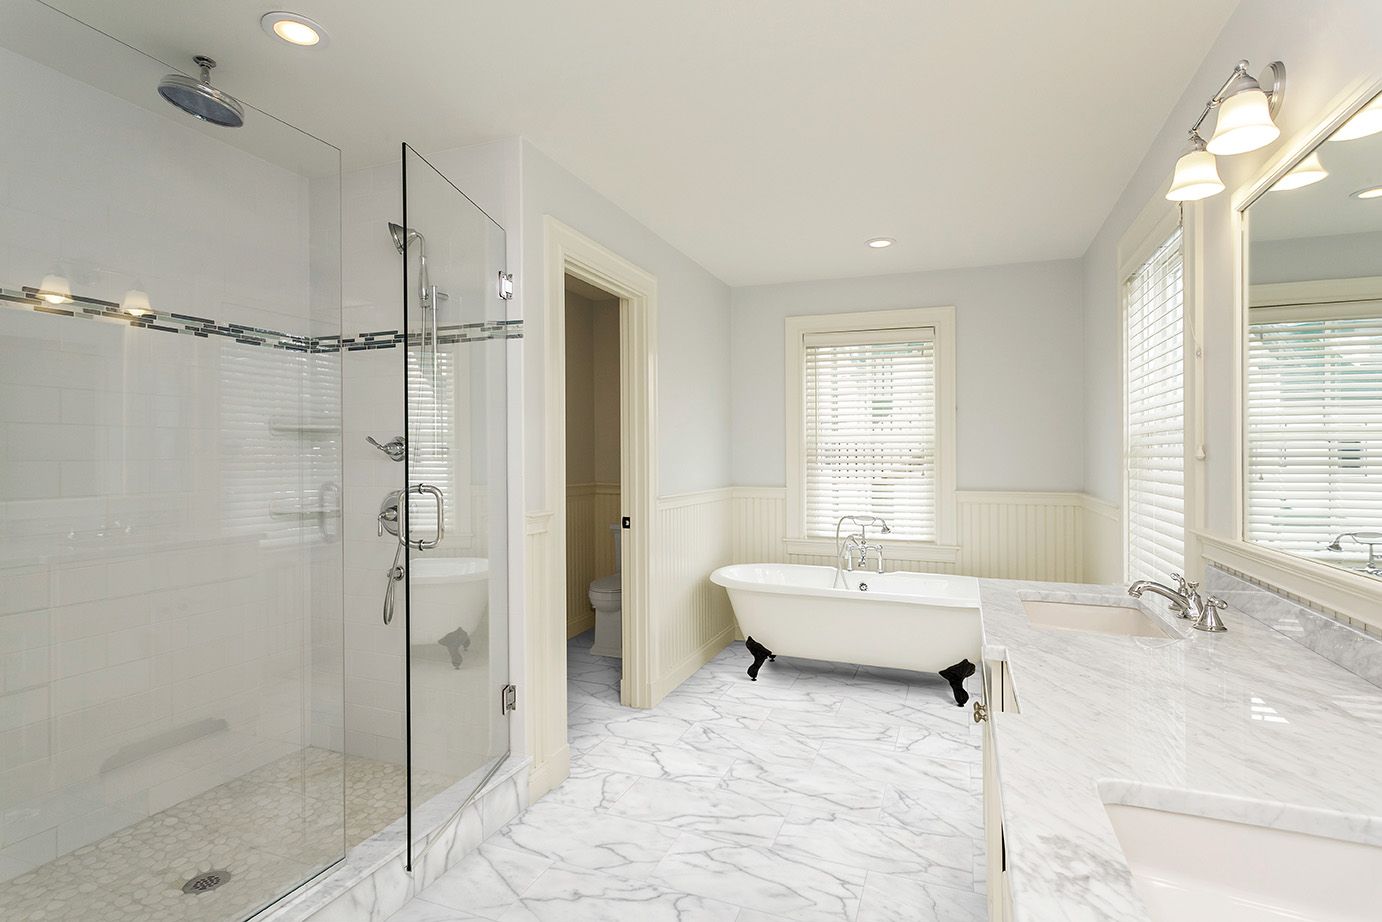 How to clean marble bathroom floor. The dos and don'ts